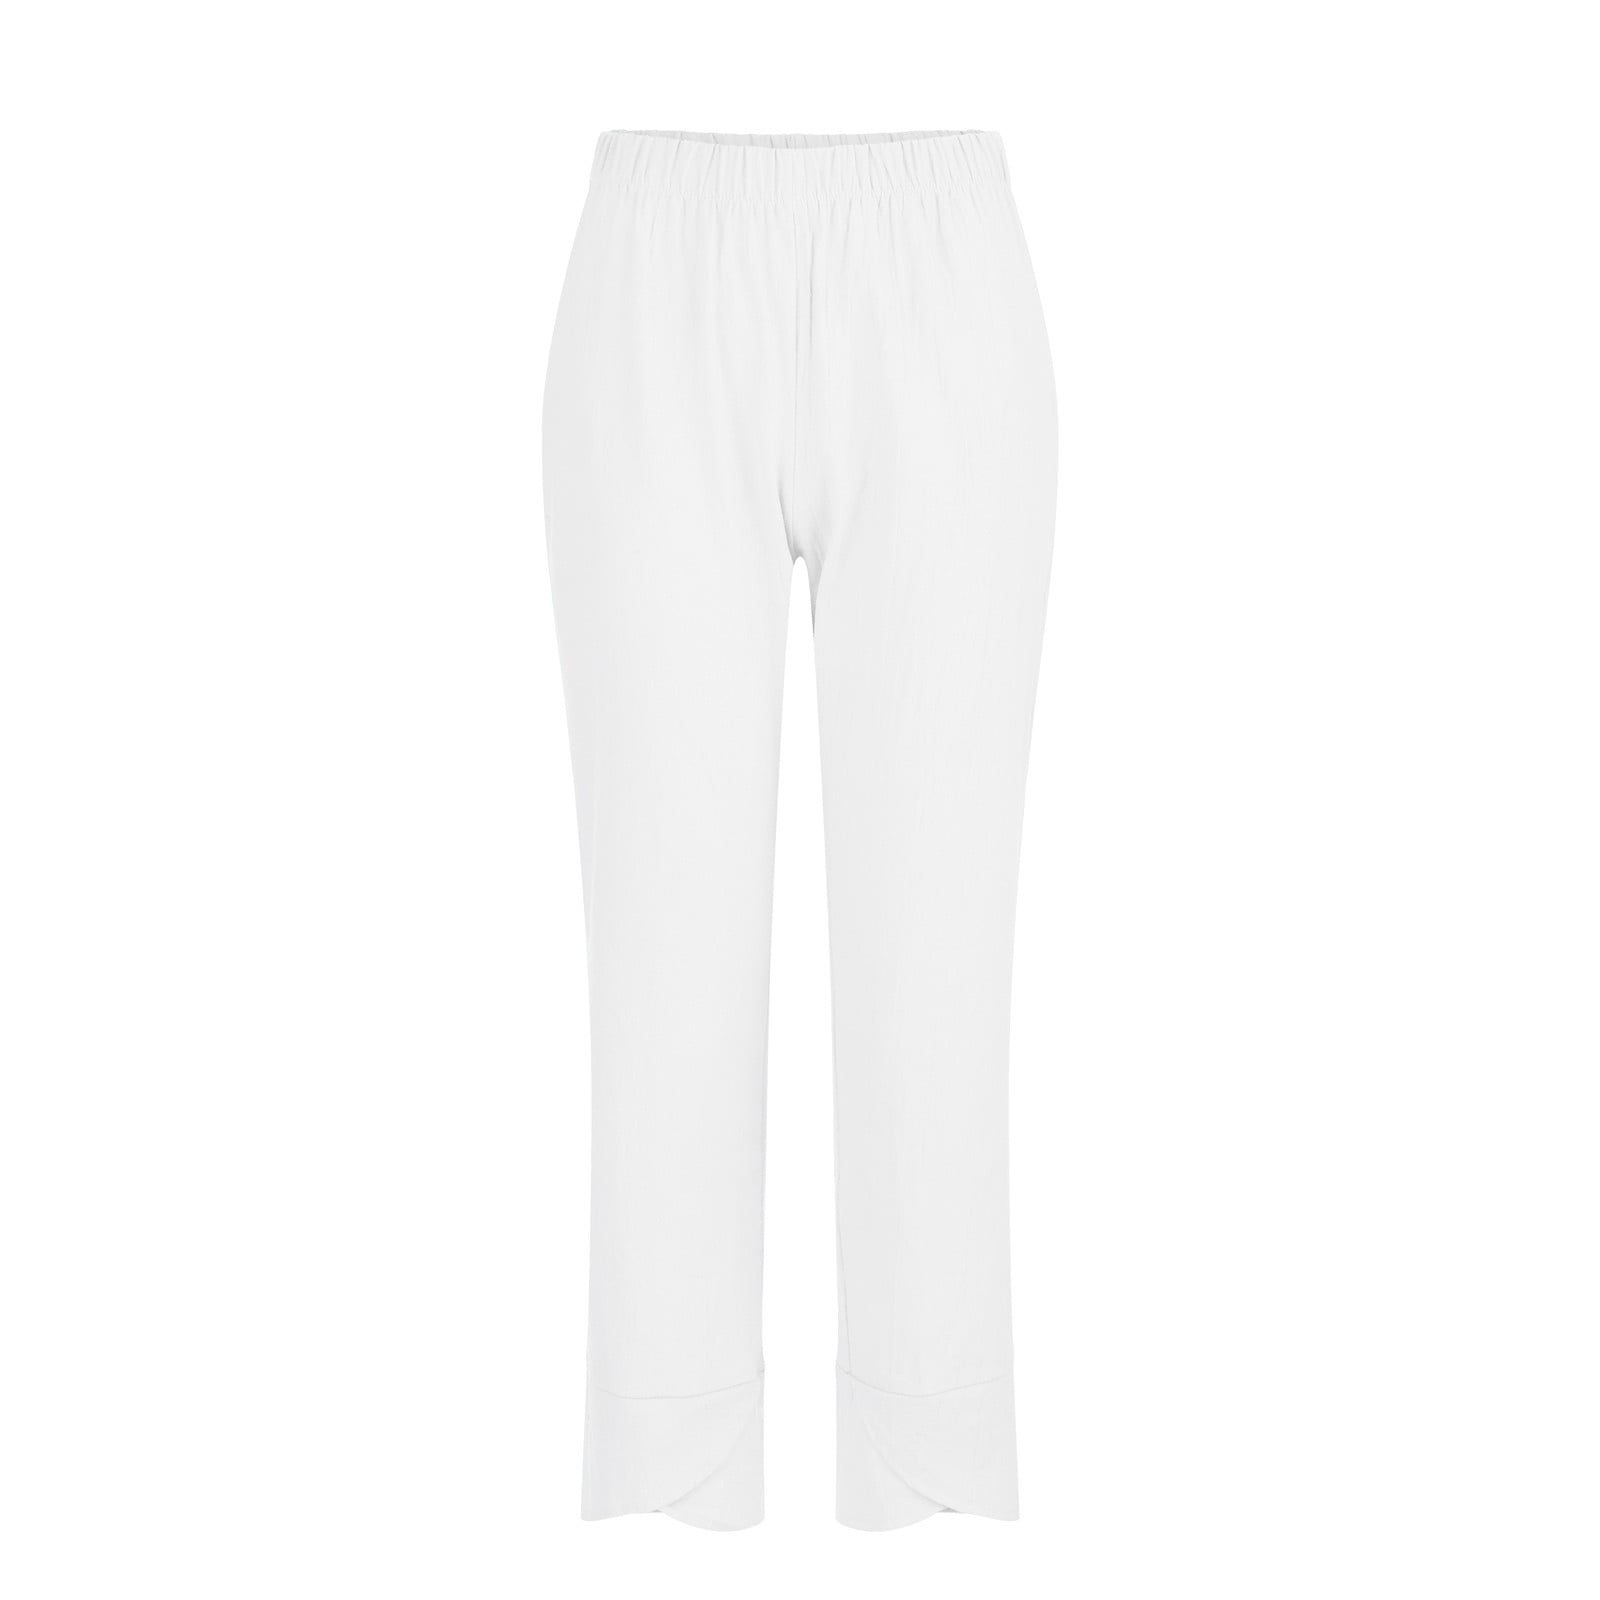 Buy Off White Cotton Linen Pants For Women by Chambray & Co. Online at Aza  Fashions.